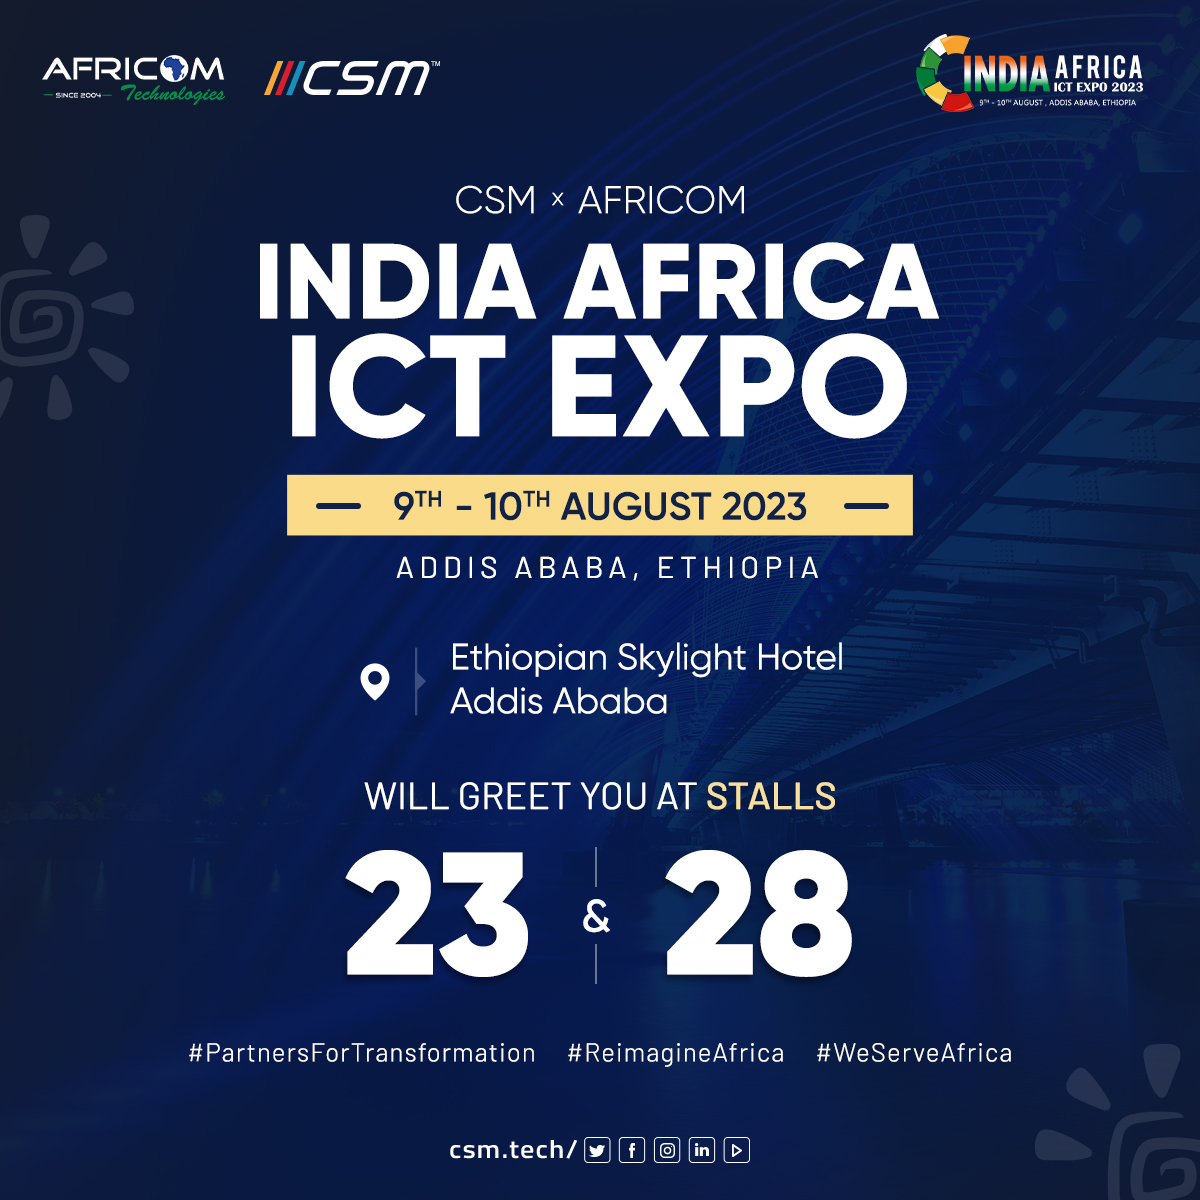 CSM & AFRICOM will be waiting to greet you all at India Africa ICT Expo in Addis Ababa. Come, say hello!    

#PartnersForTransformation #ReimagineAfrica #WeServeAfrica